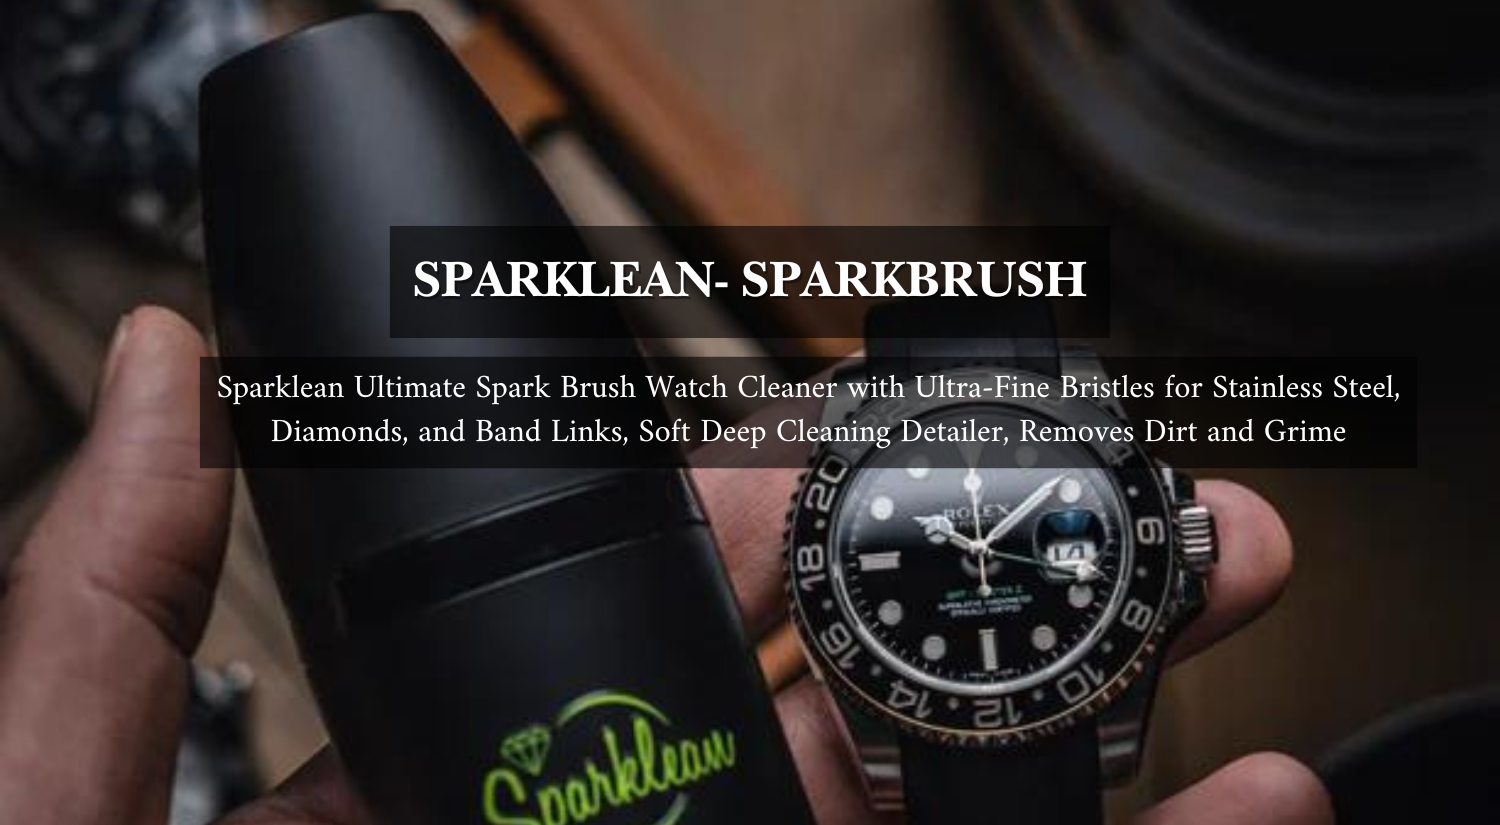 SparkBrush Soft-Bristle Gentle on All Metals, Jewelry, & Watches